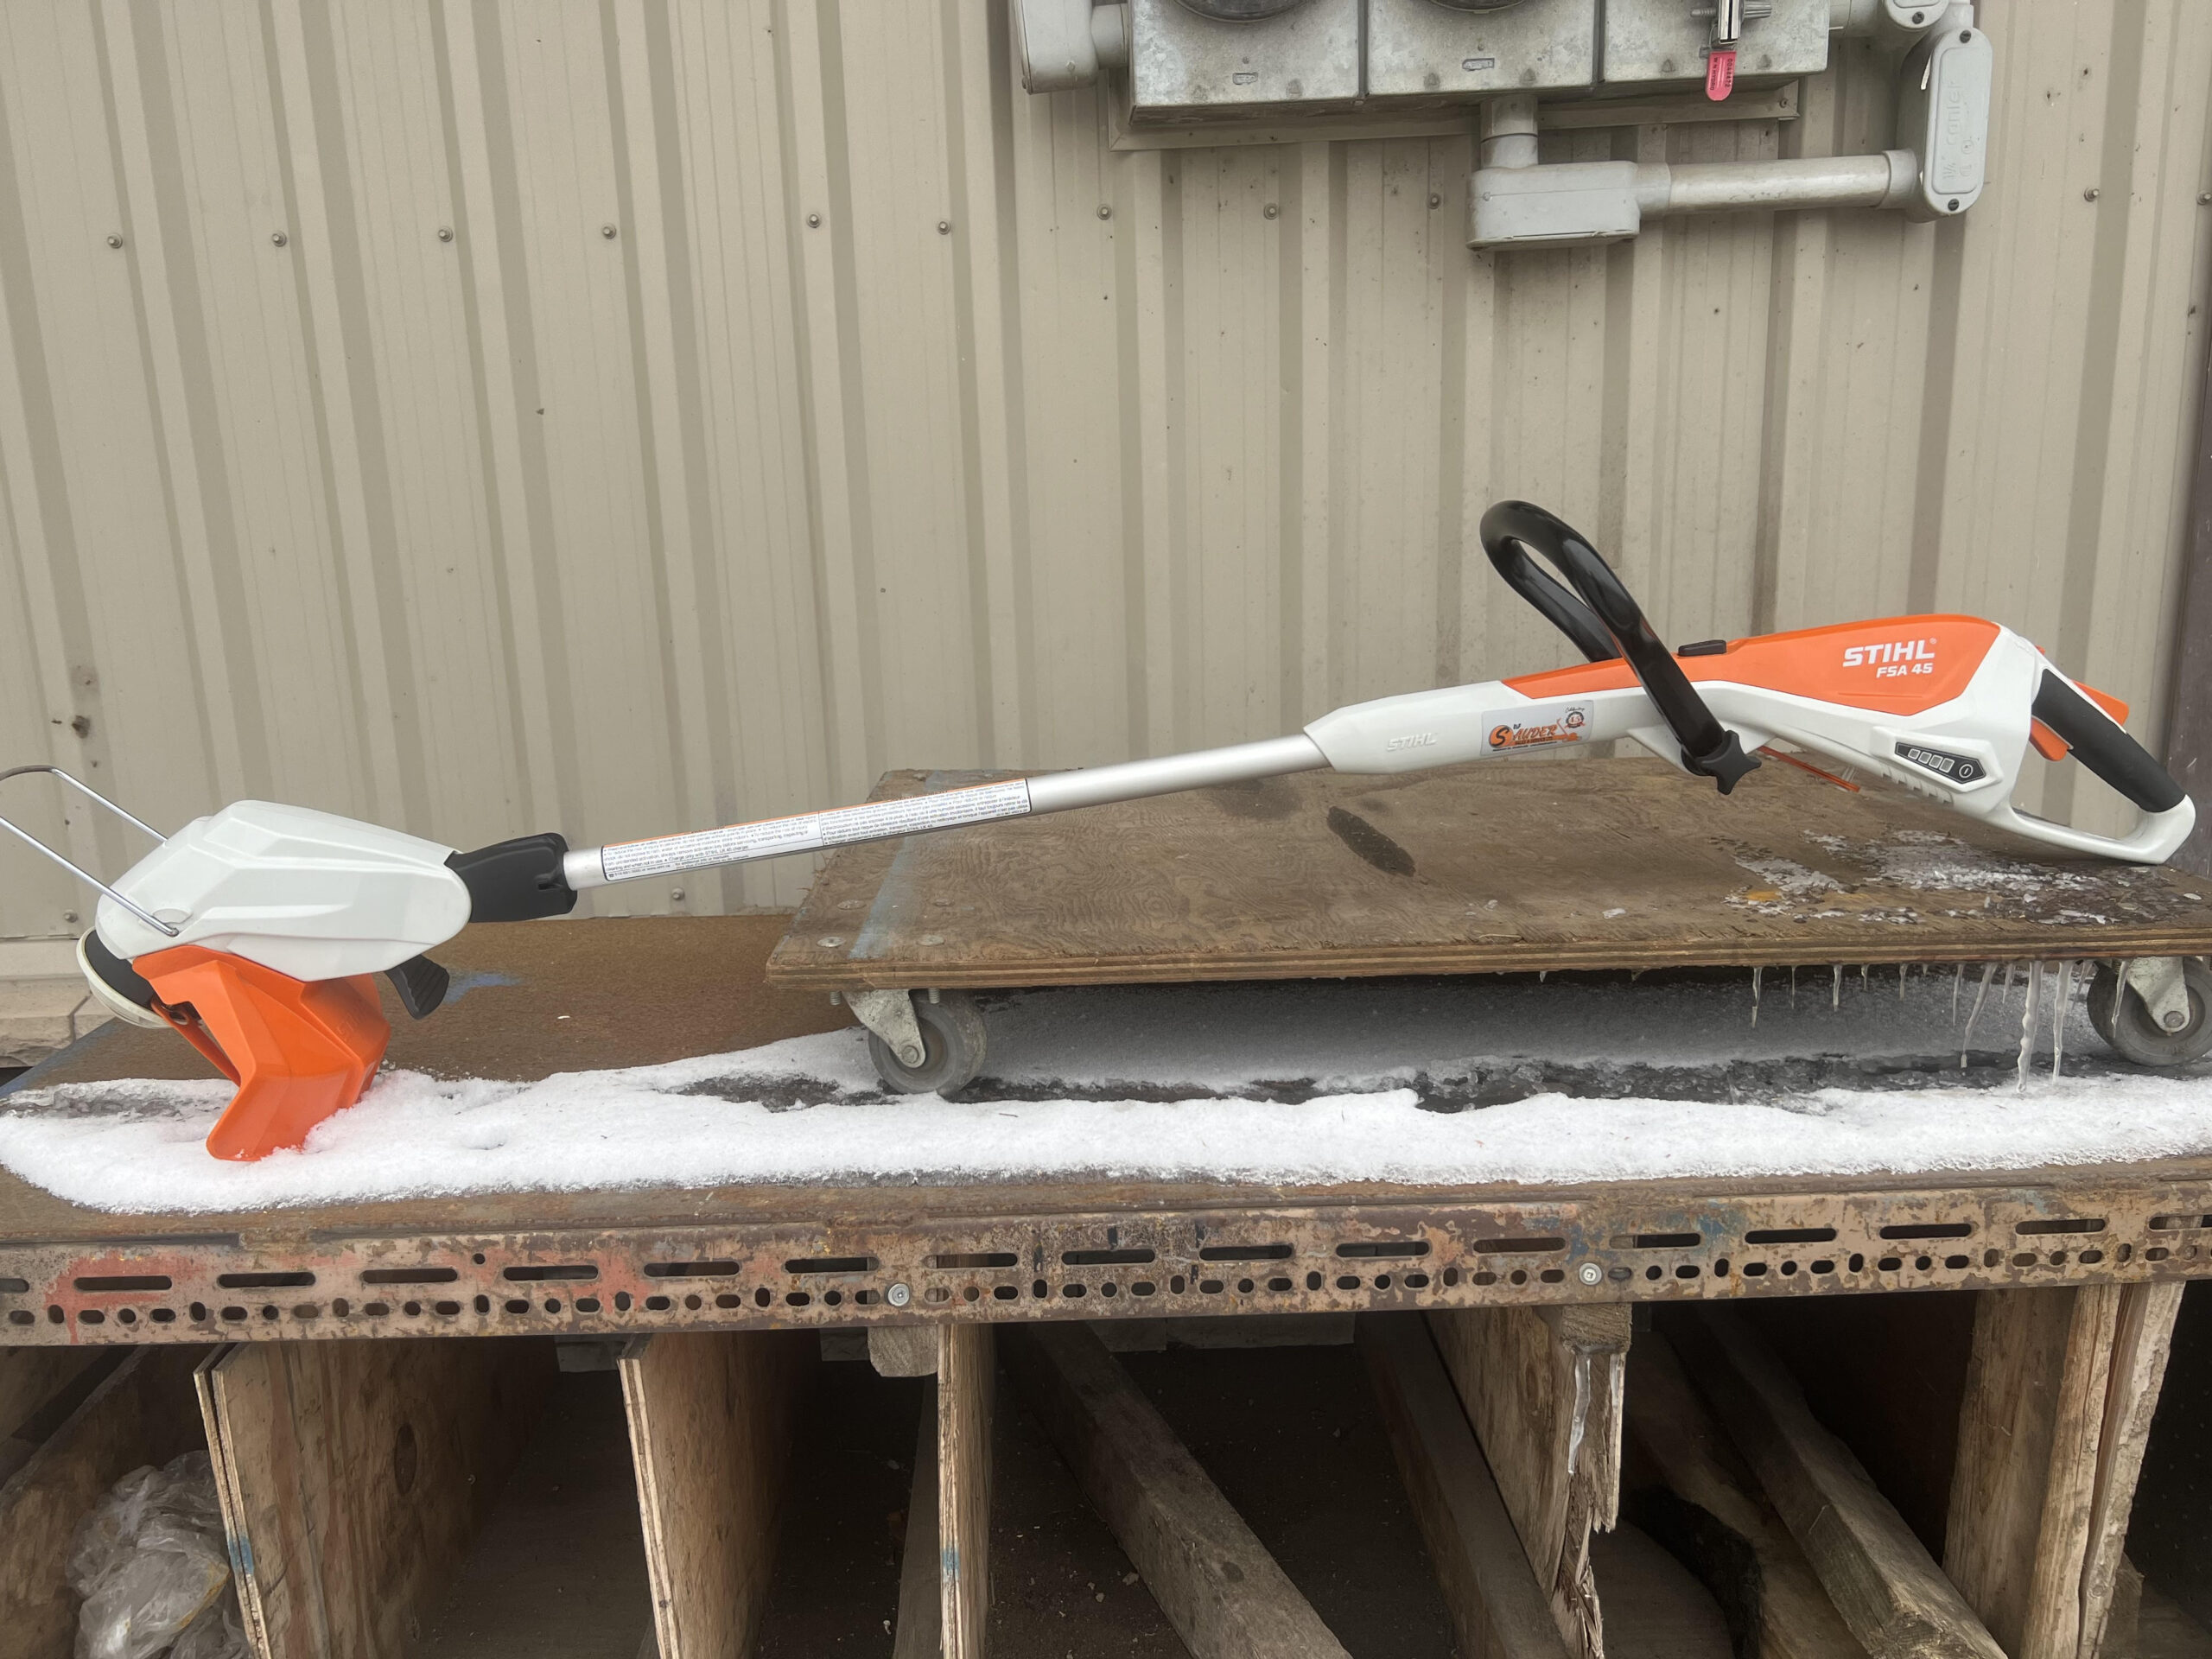 Stihl FSA45 Trimmer - used once as a demo. Comes w/ Full Warranty.